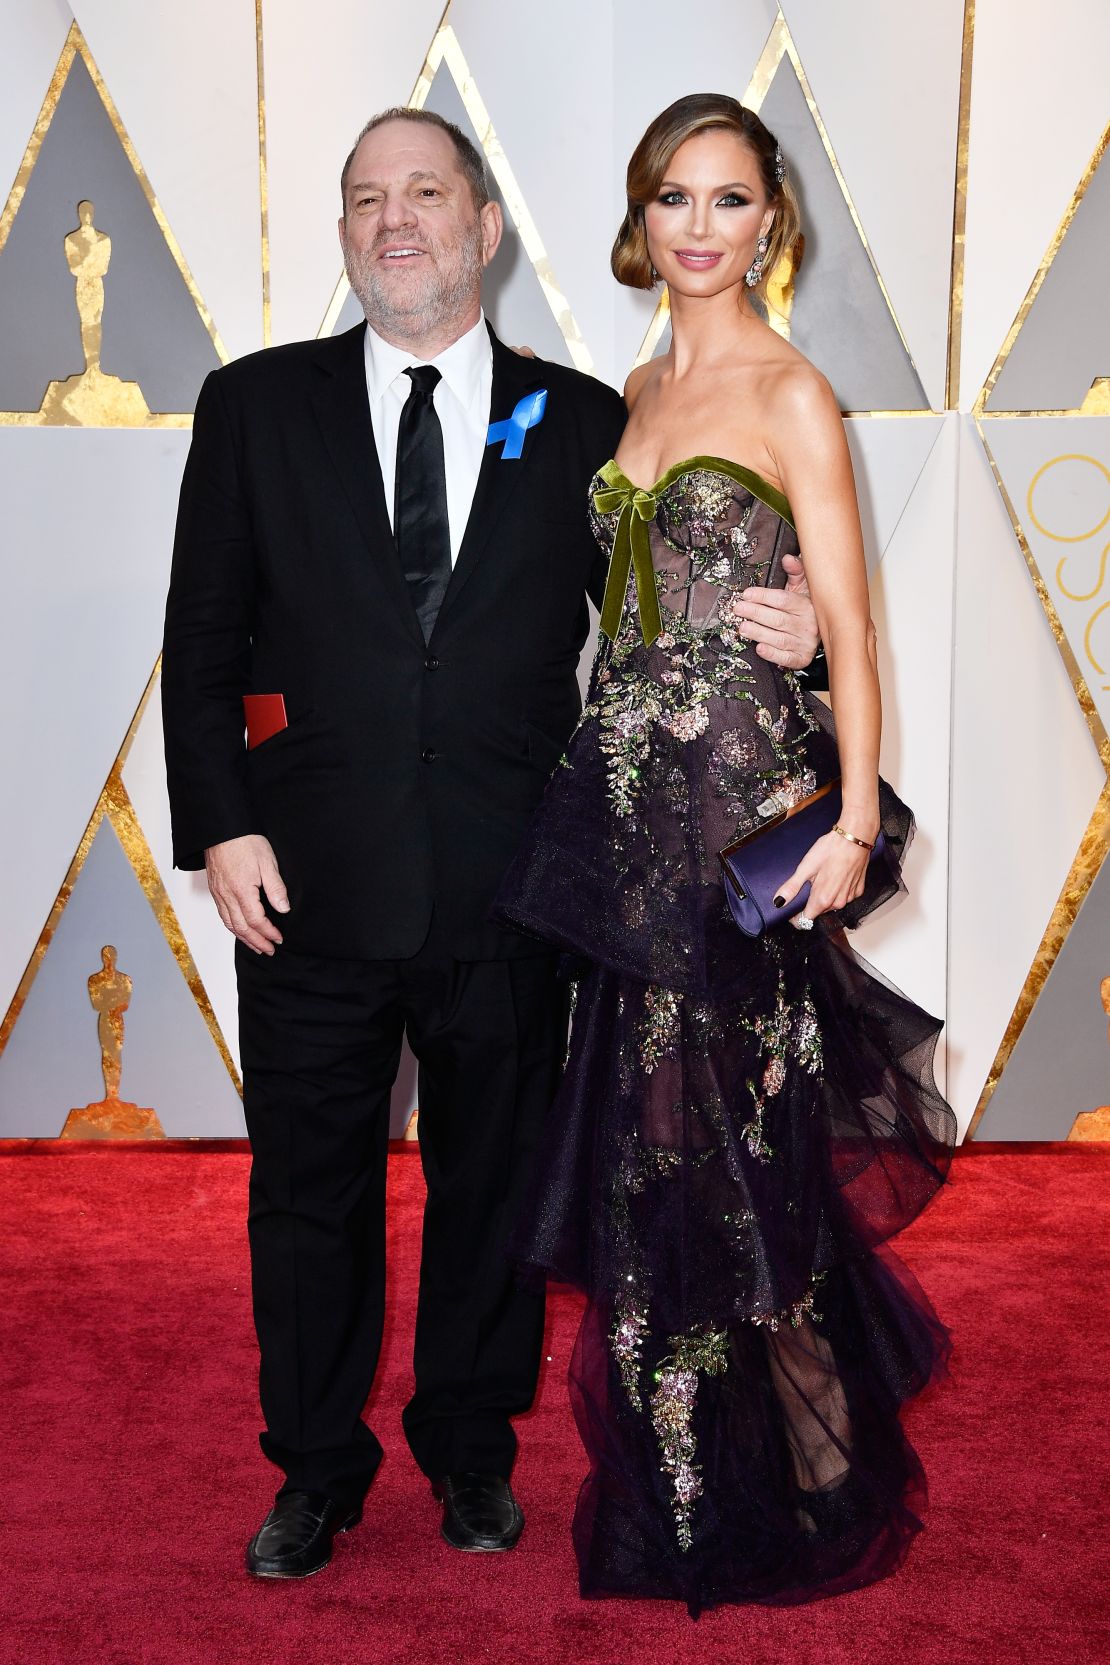 Harvey Weinstein and Georgina Chapman at the Oscars in 2017. (Photo by Frazer Harrison/Getty Images)